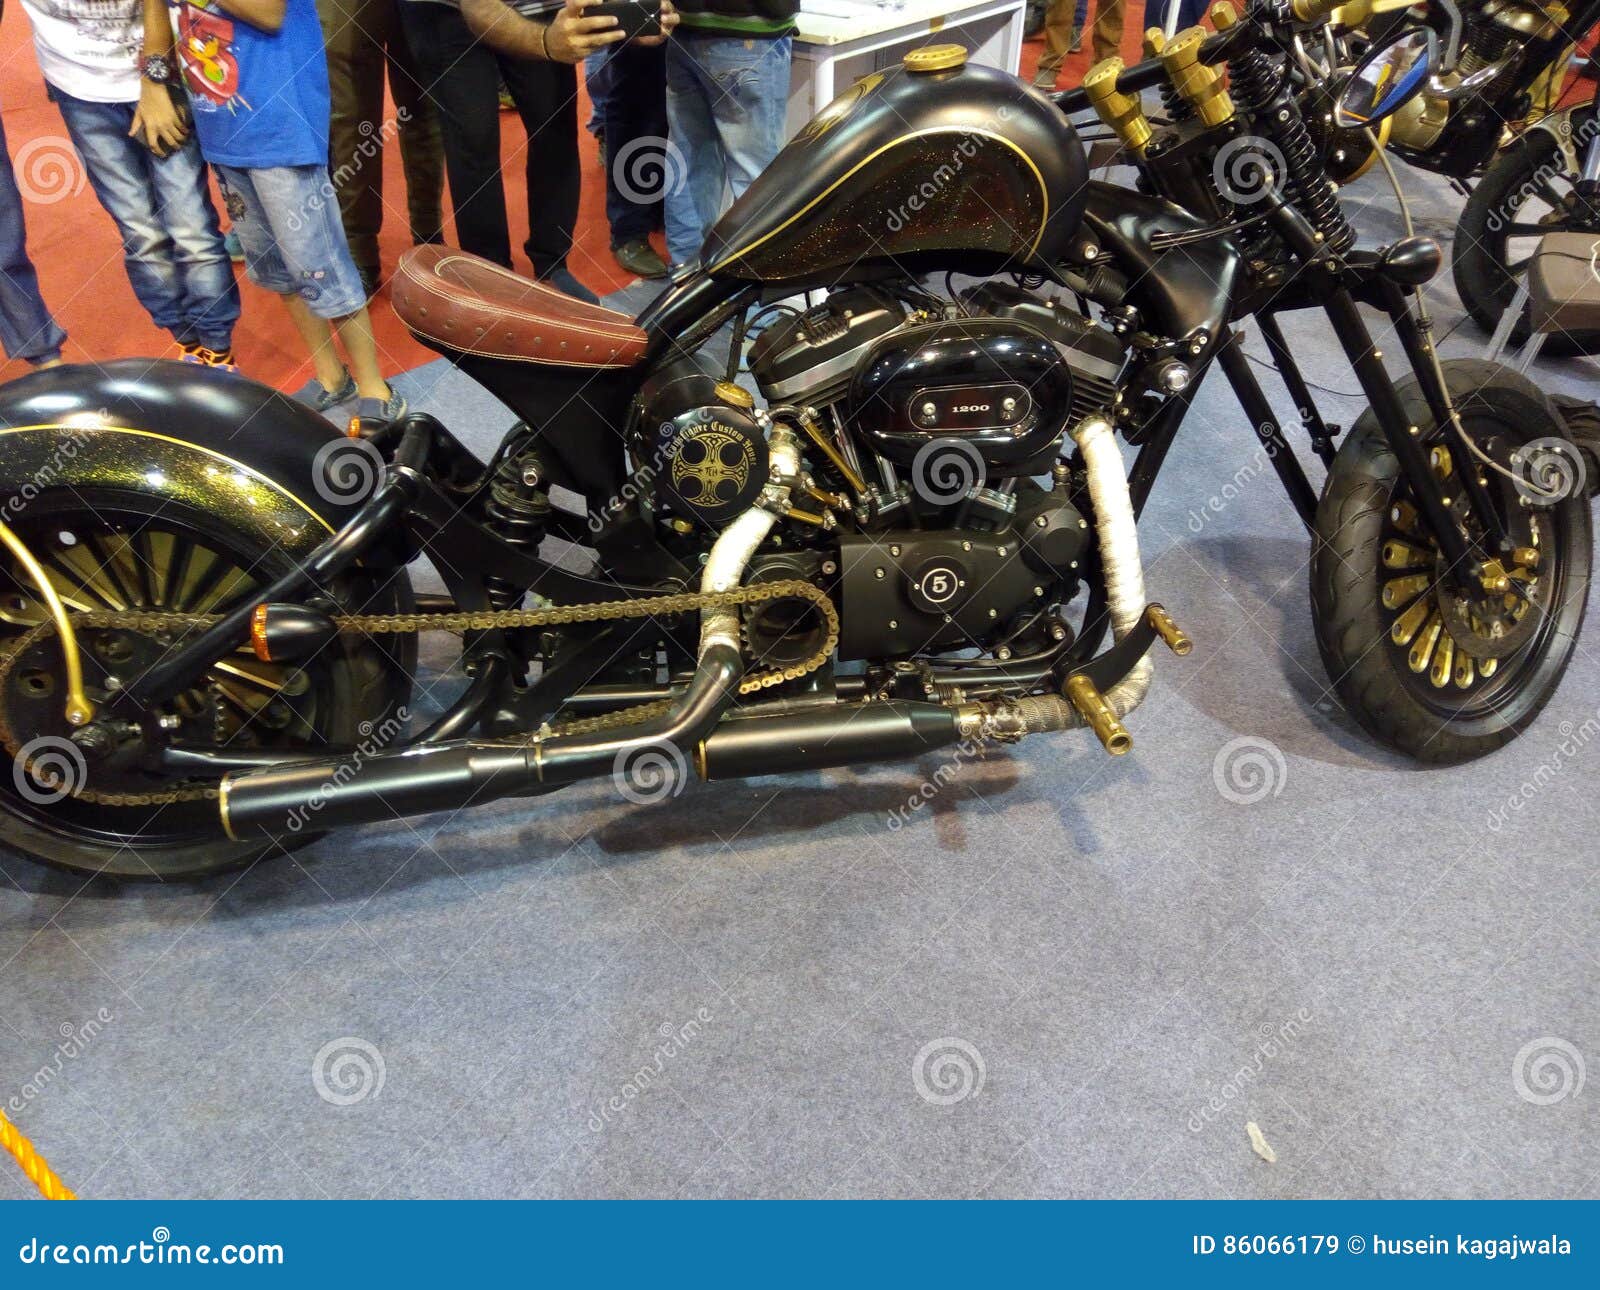 Auto car and bike show editorial stock image. Image of show - 86066179